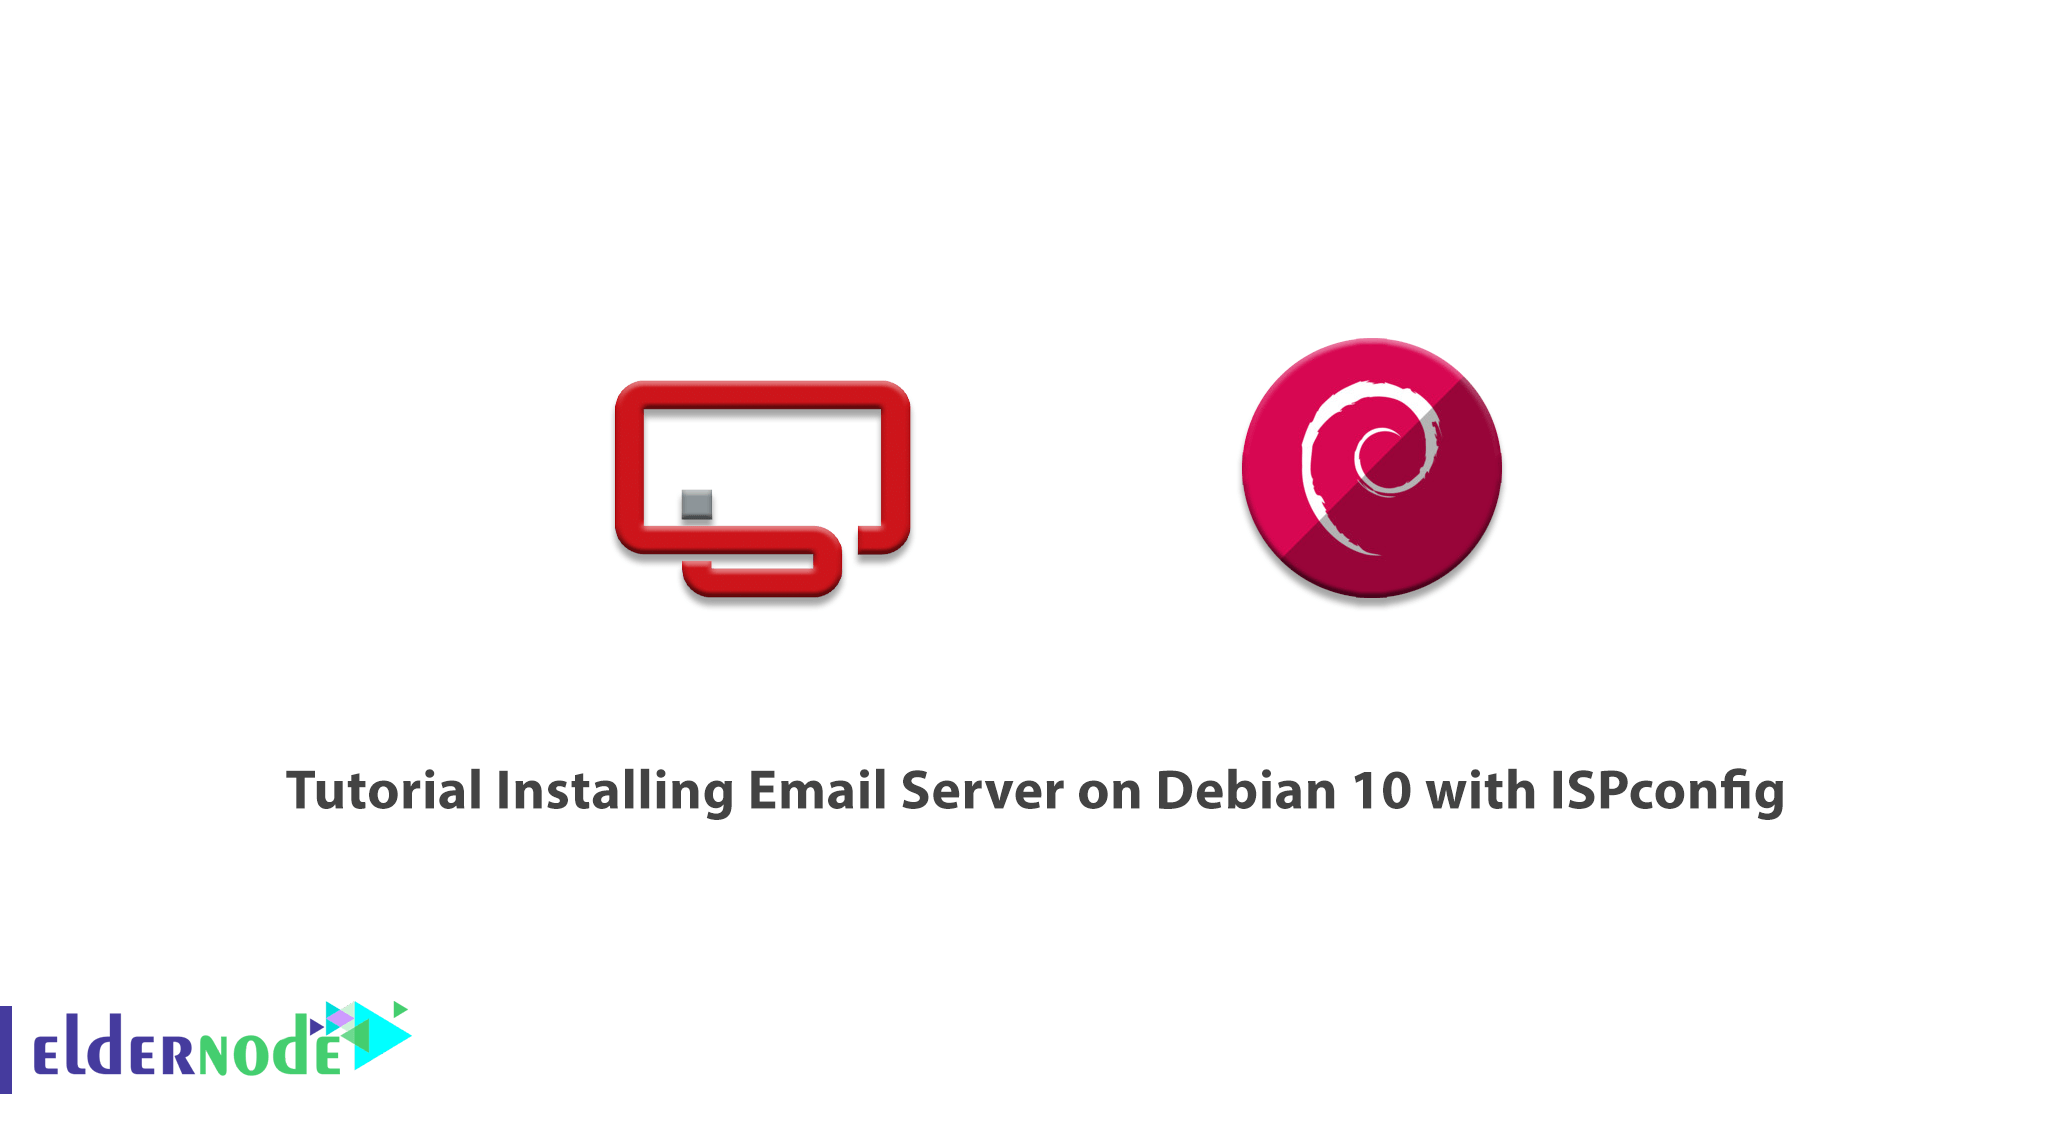 Tutorial Installing Email Server on Debian 10 with ISPconfig